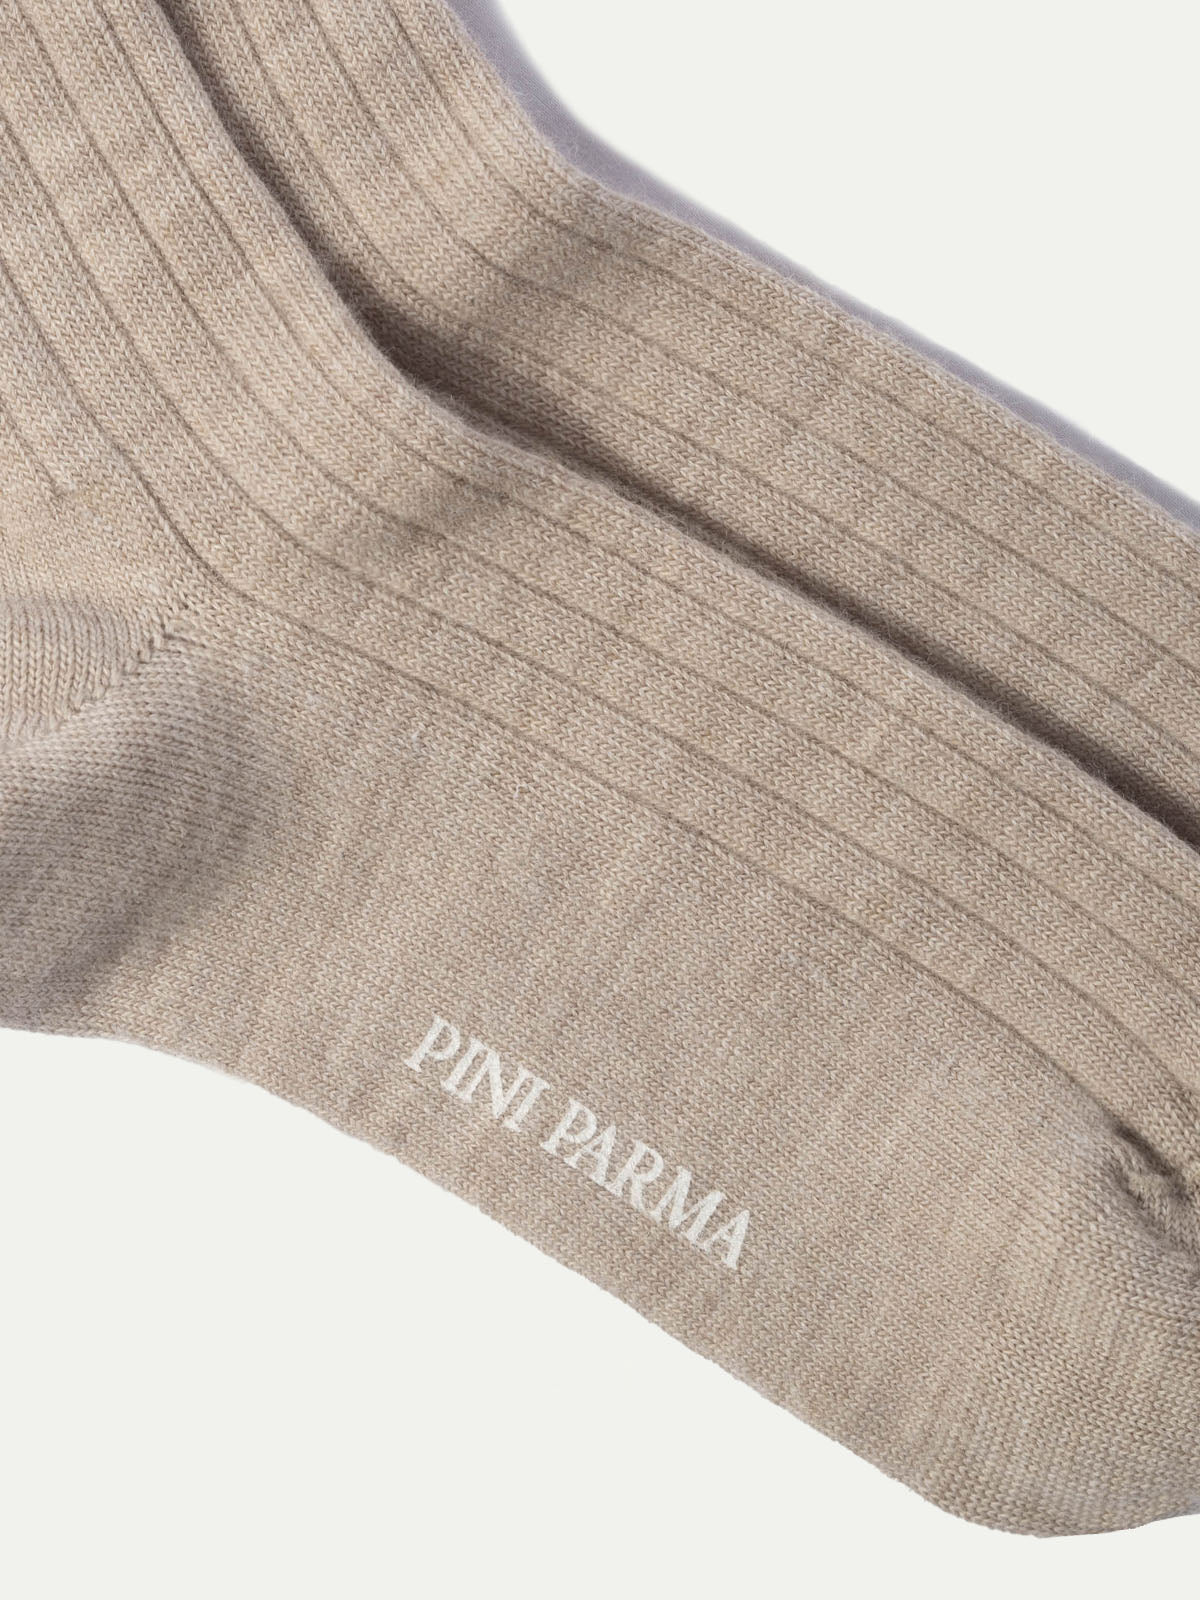 Beige - Super durable Wool short socks - Made in Italy